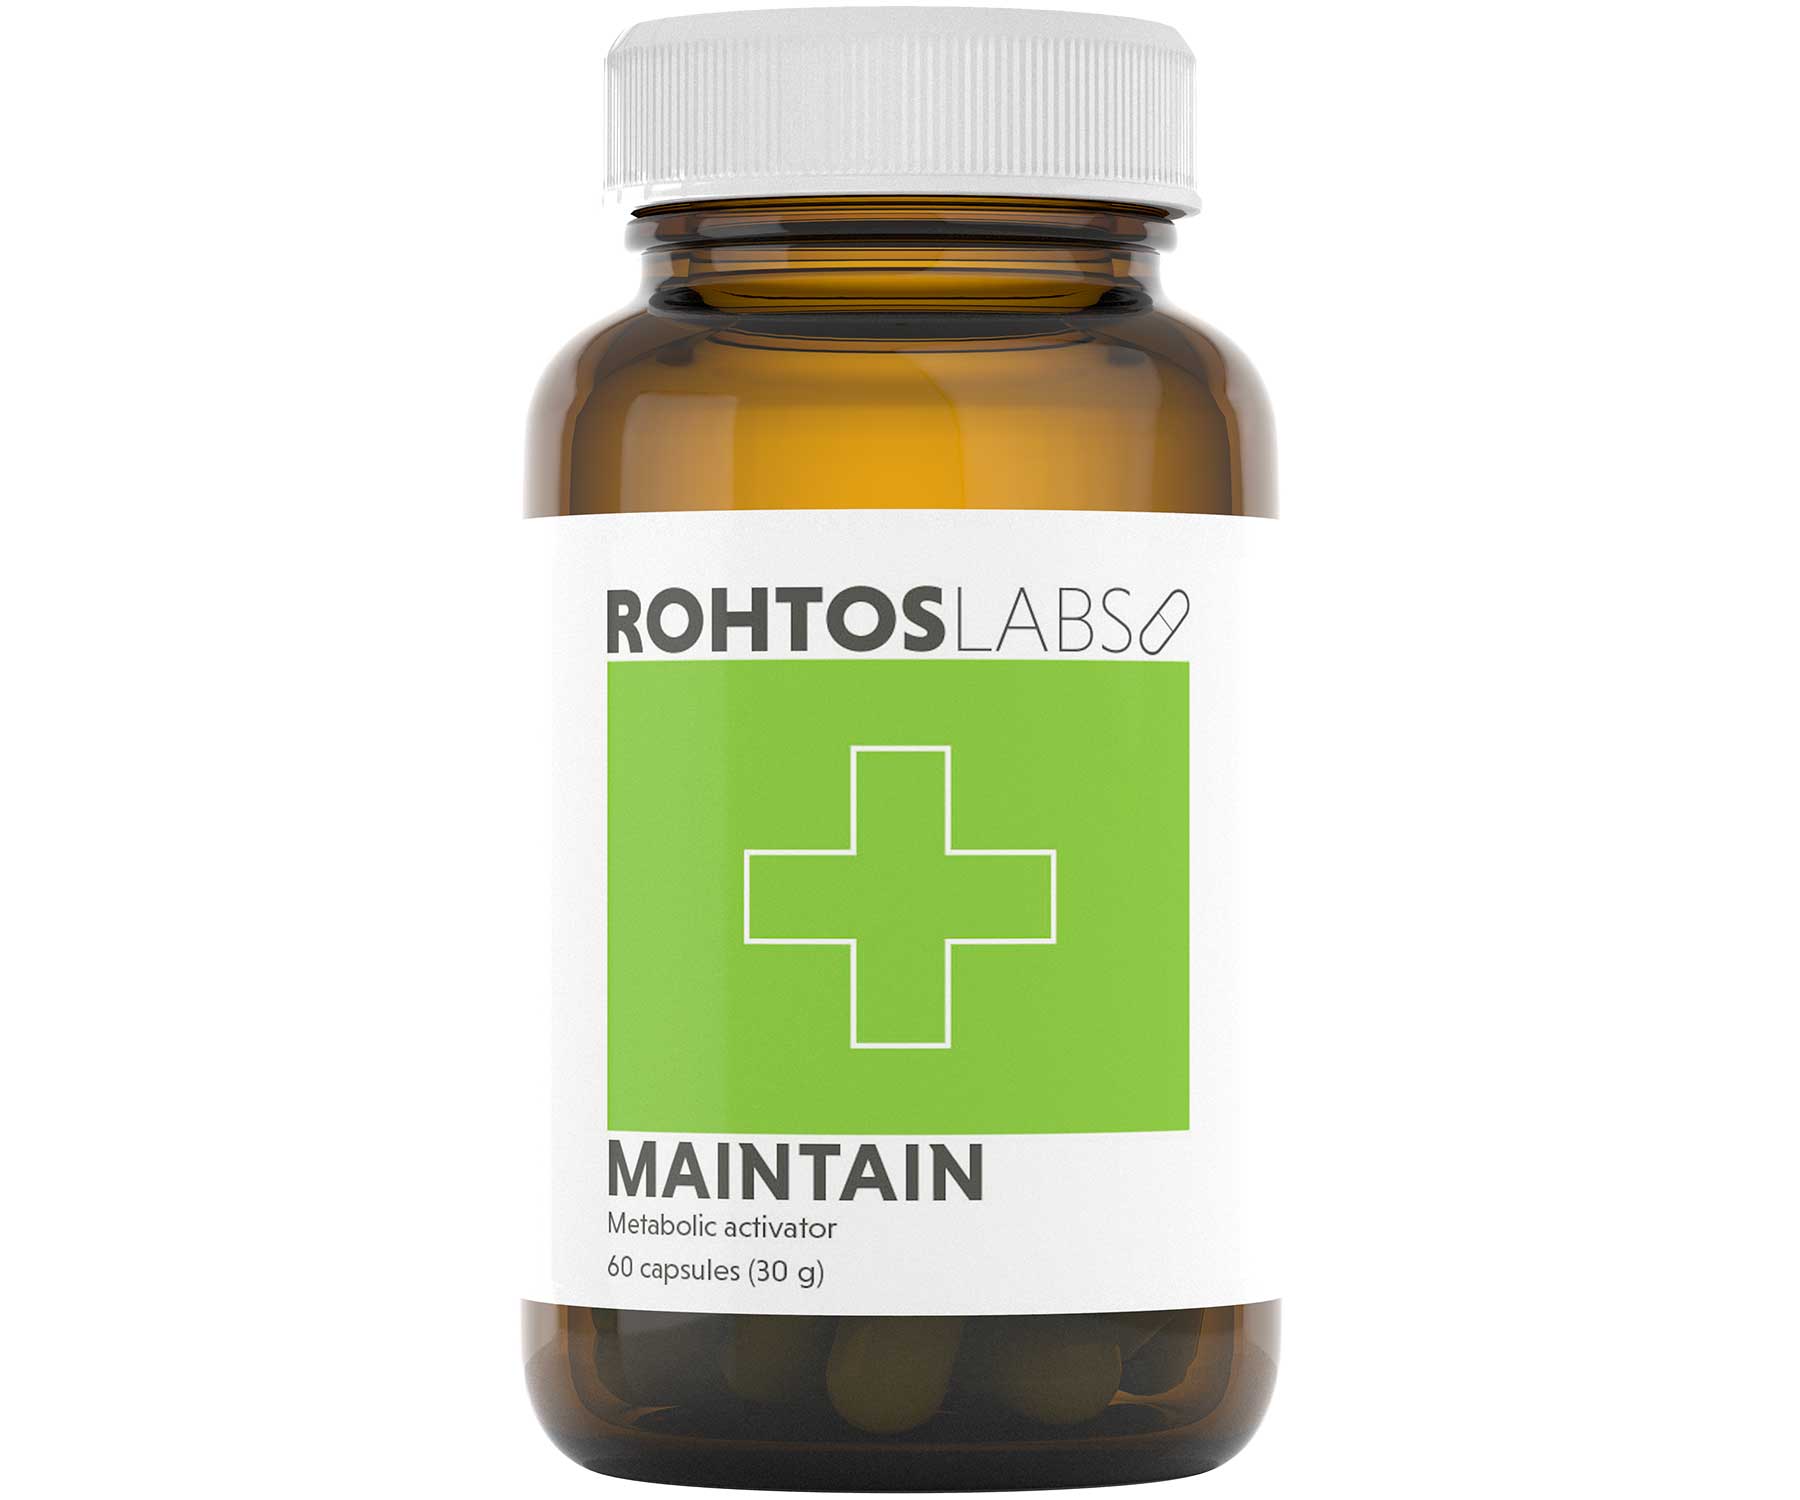 Compounds in Maintain help the body tackle inflammation, support immune, hormone and nervous systems and augment macronutrient metabolism. Metabolic activator for everyday use. Arctic Biotools - Made in Finland